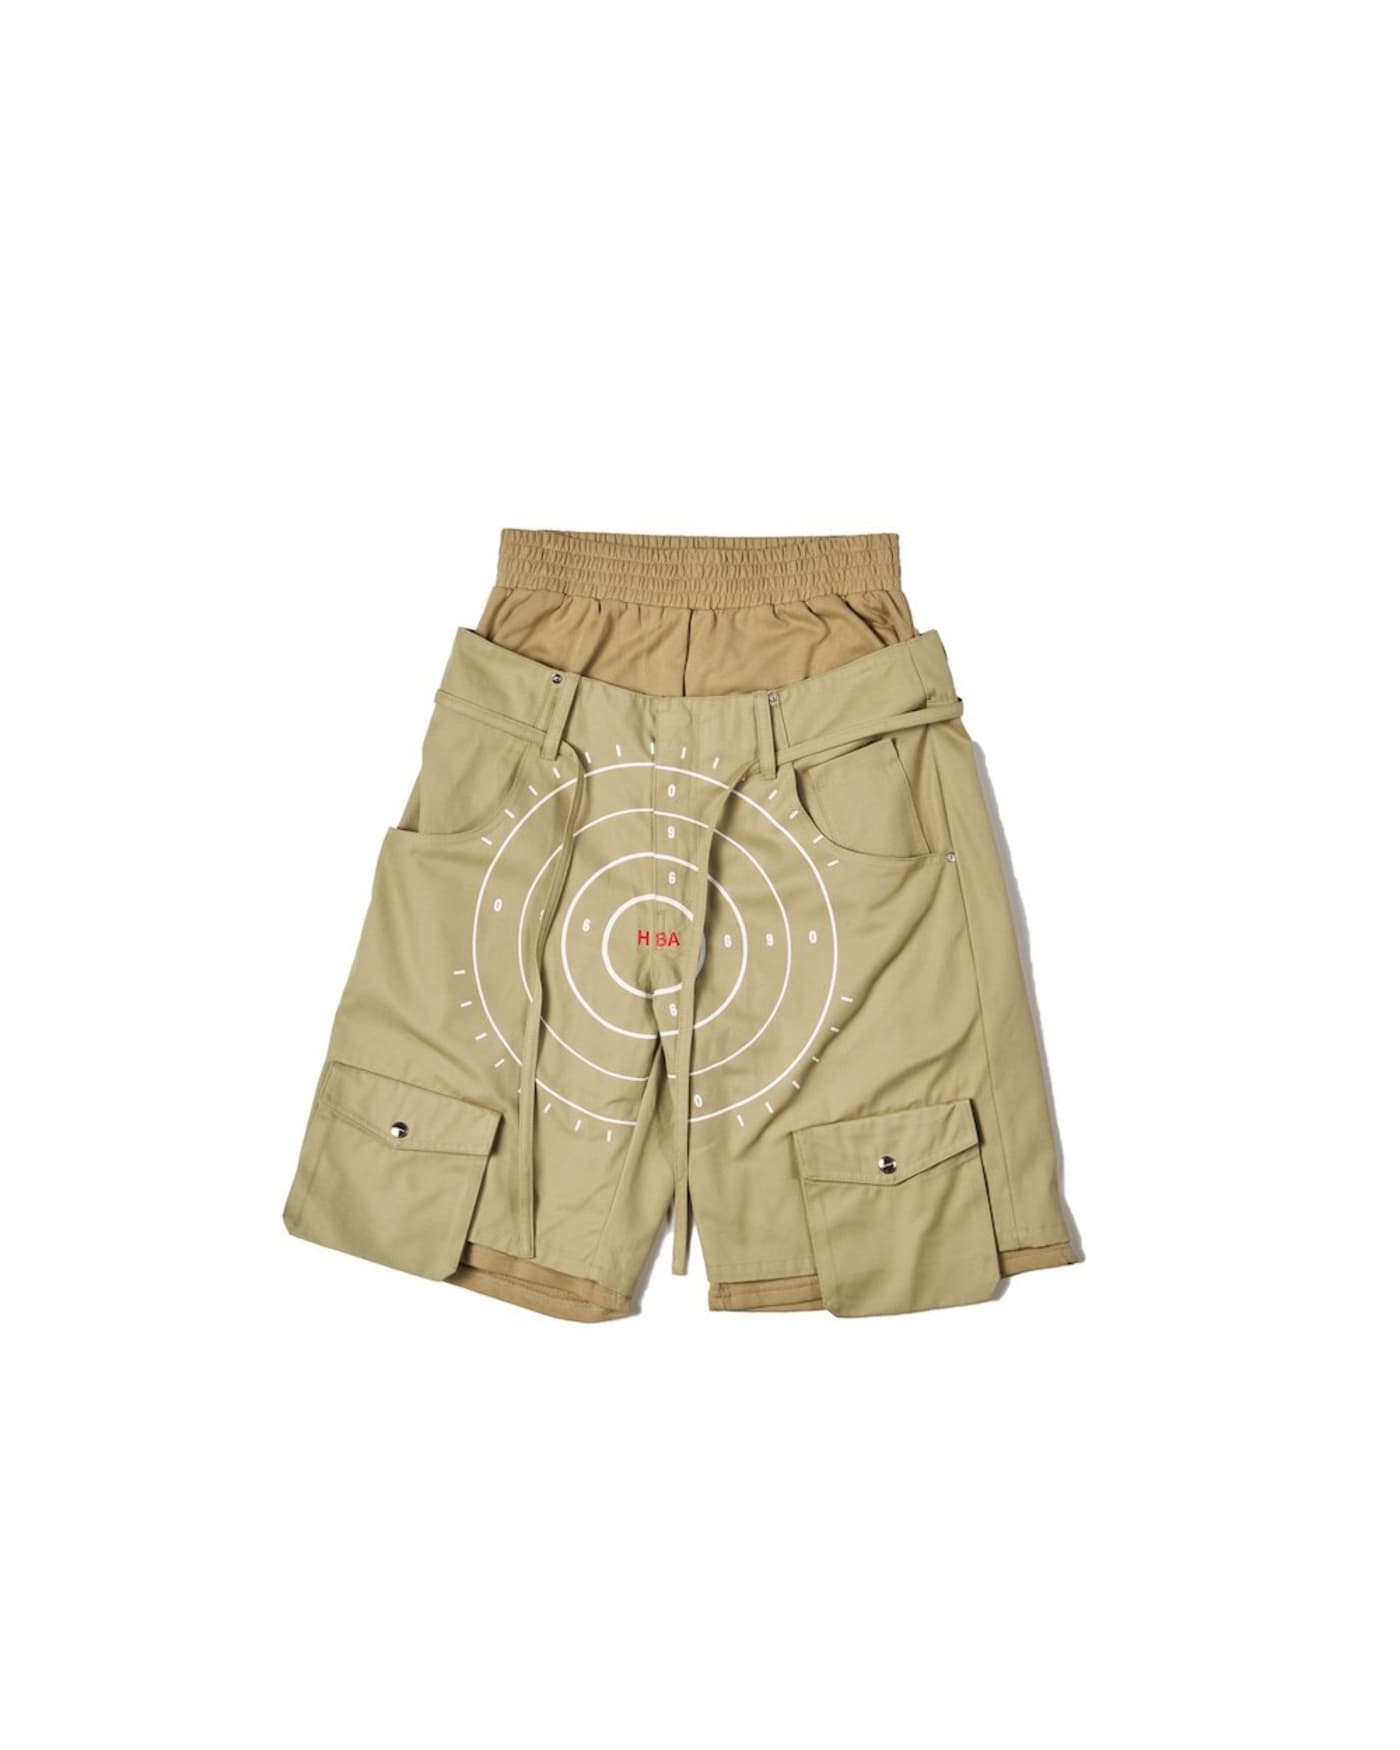 15 Best Shorts To Buy Right Now: Designer to Streetwear Shorts 